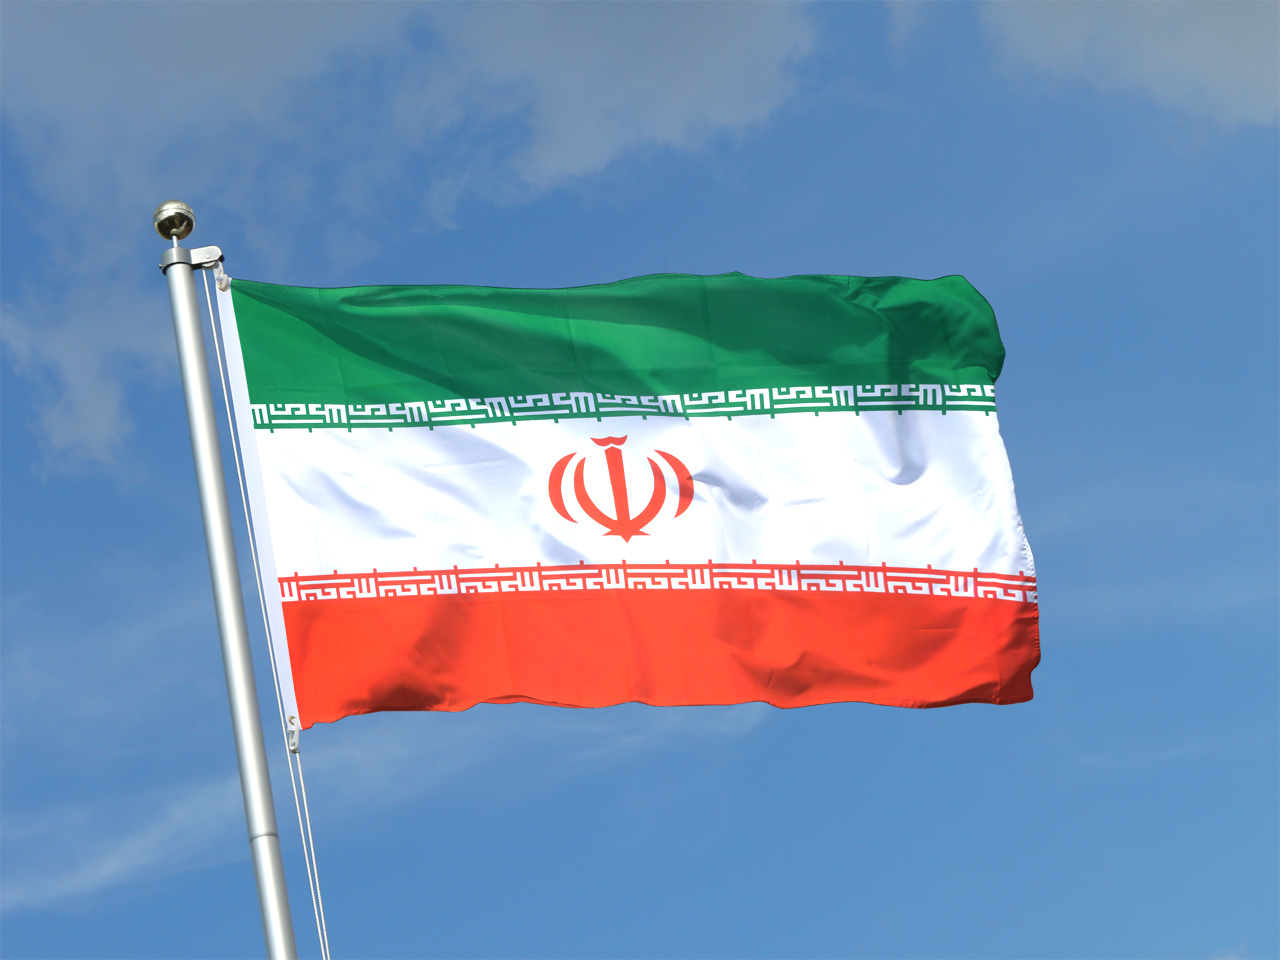 Iran Flag for Sale - Buy online at Royal-Flags